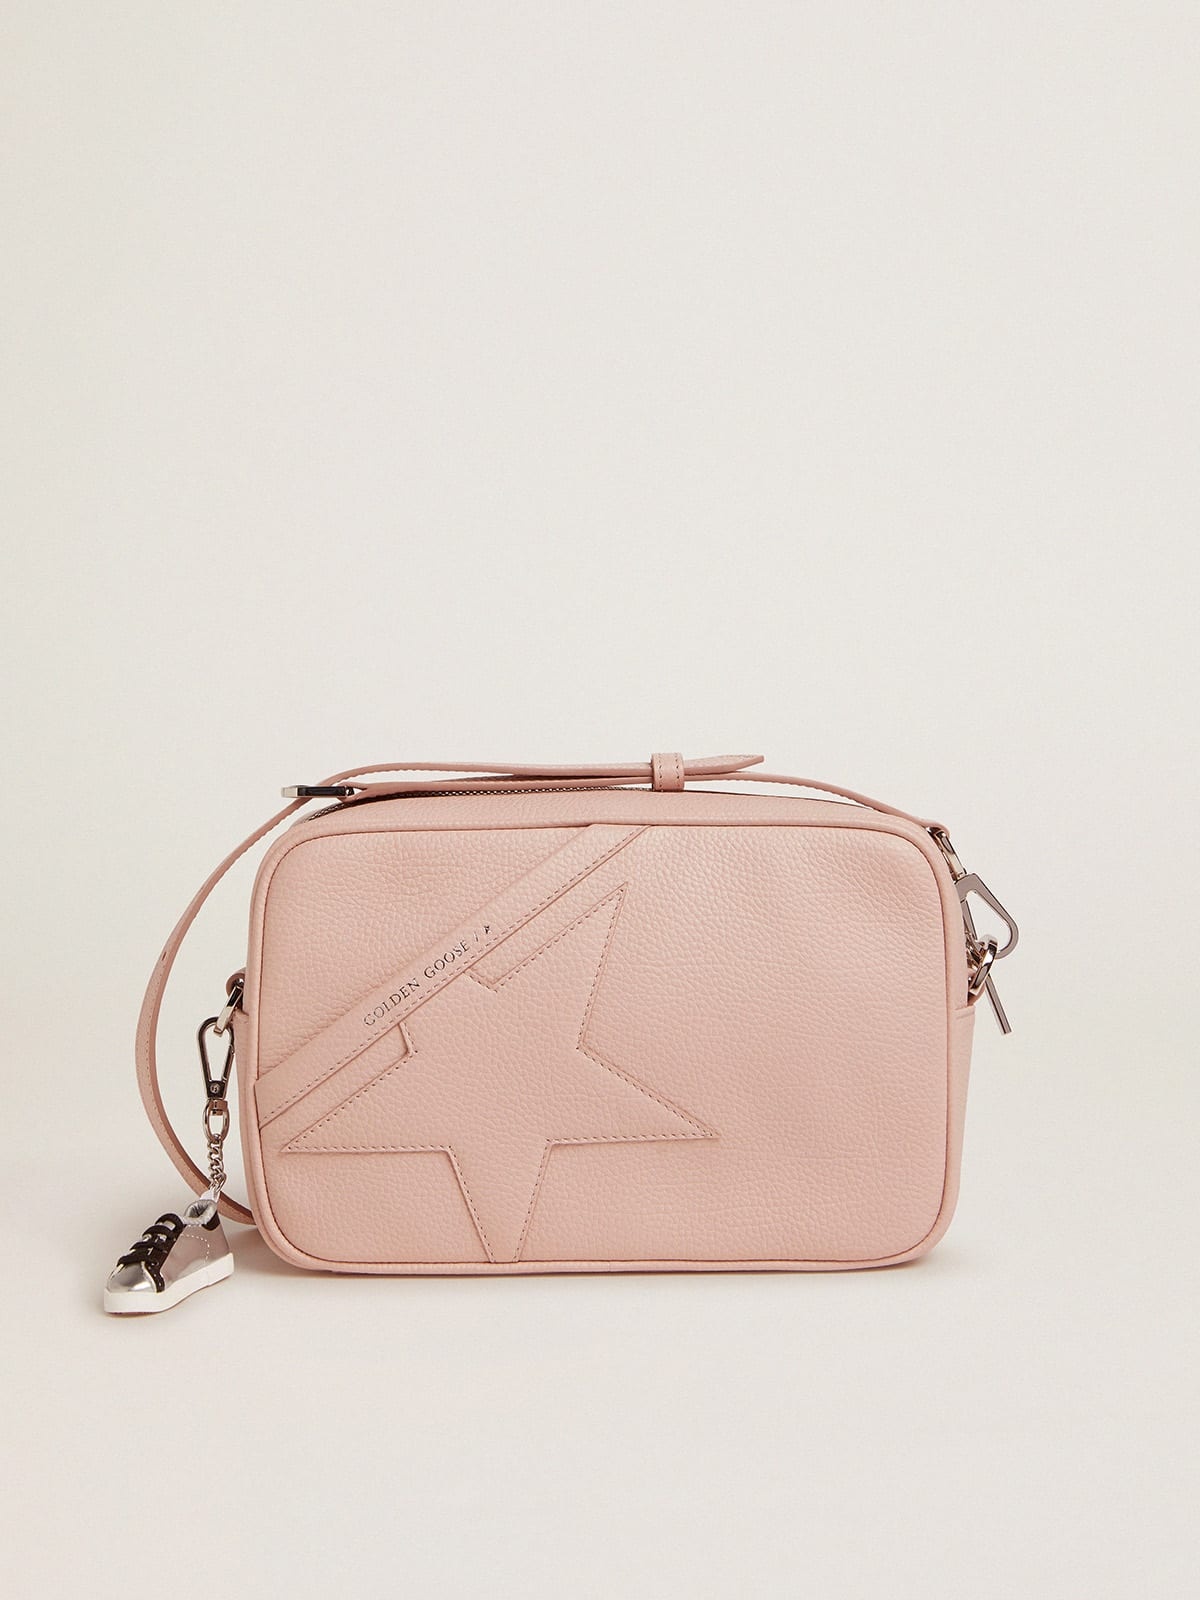 Star Bag in quartz-pink hammered leather with tone-on-tone star - 1